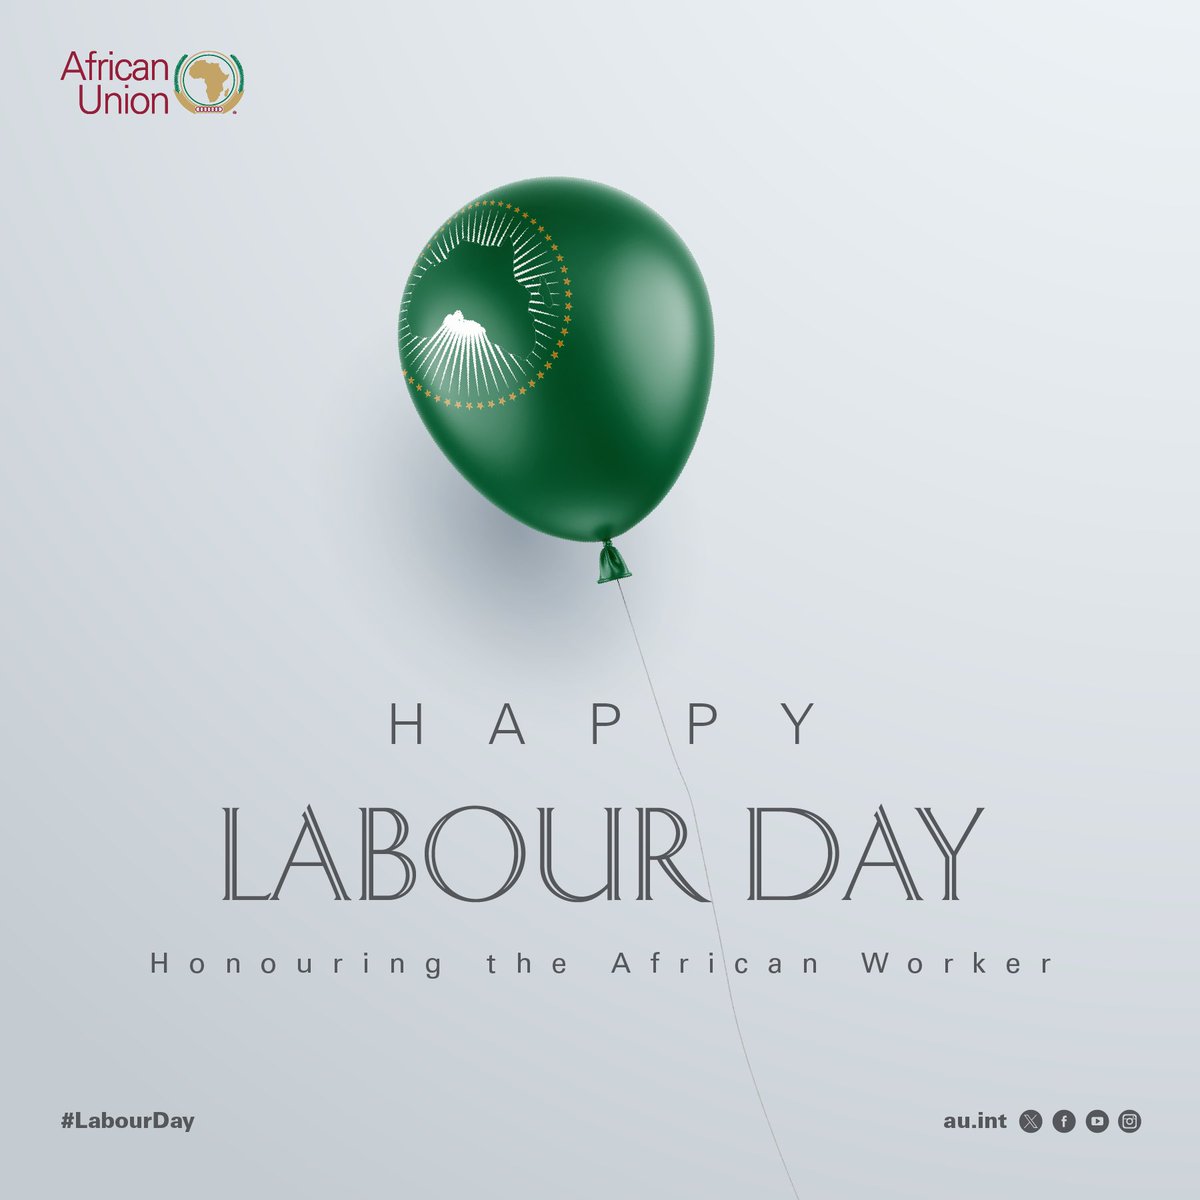 We honor and celebrate the incredible African workforce as you continue to unlock the potential of Africa within & across borders. You’re the pillar of the continent’s transformation vision #Agenda2063. Special mention to the African Union staff. We celebrate you. #HappyLaborDay